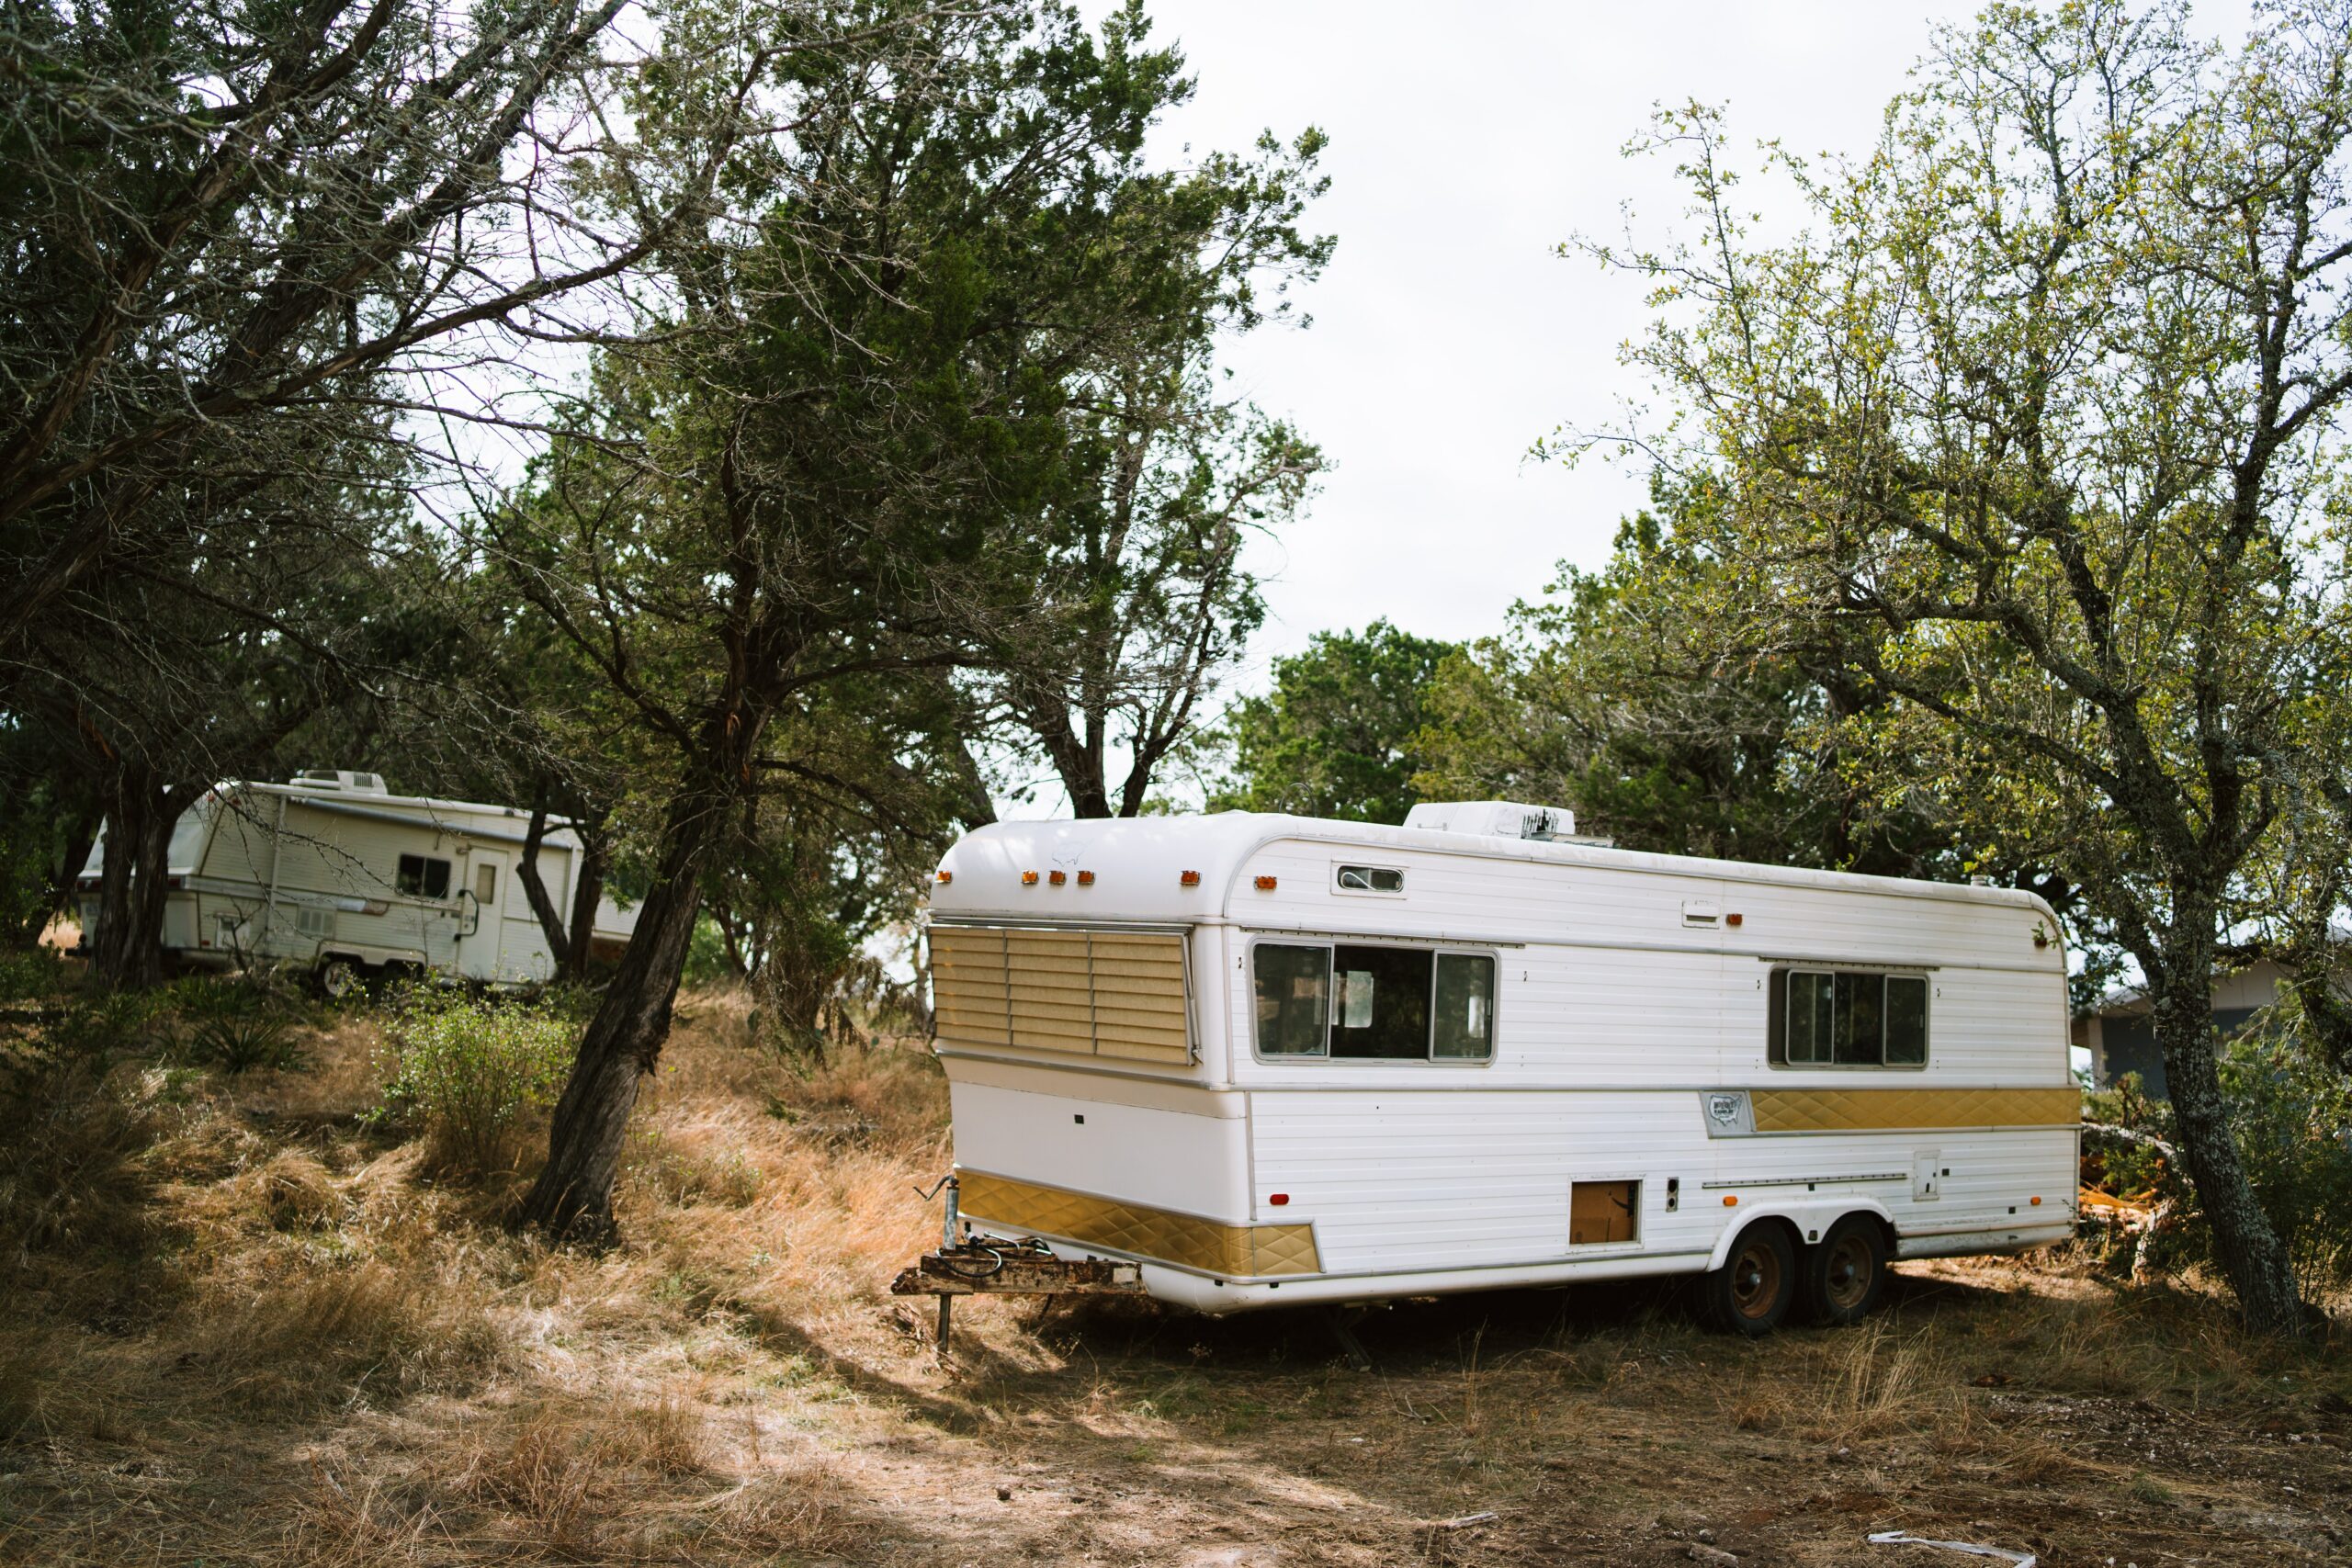 How Do People Afford to Live in an RV?